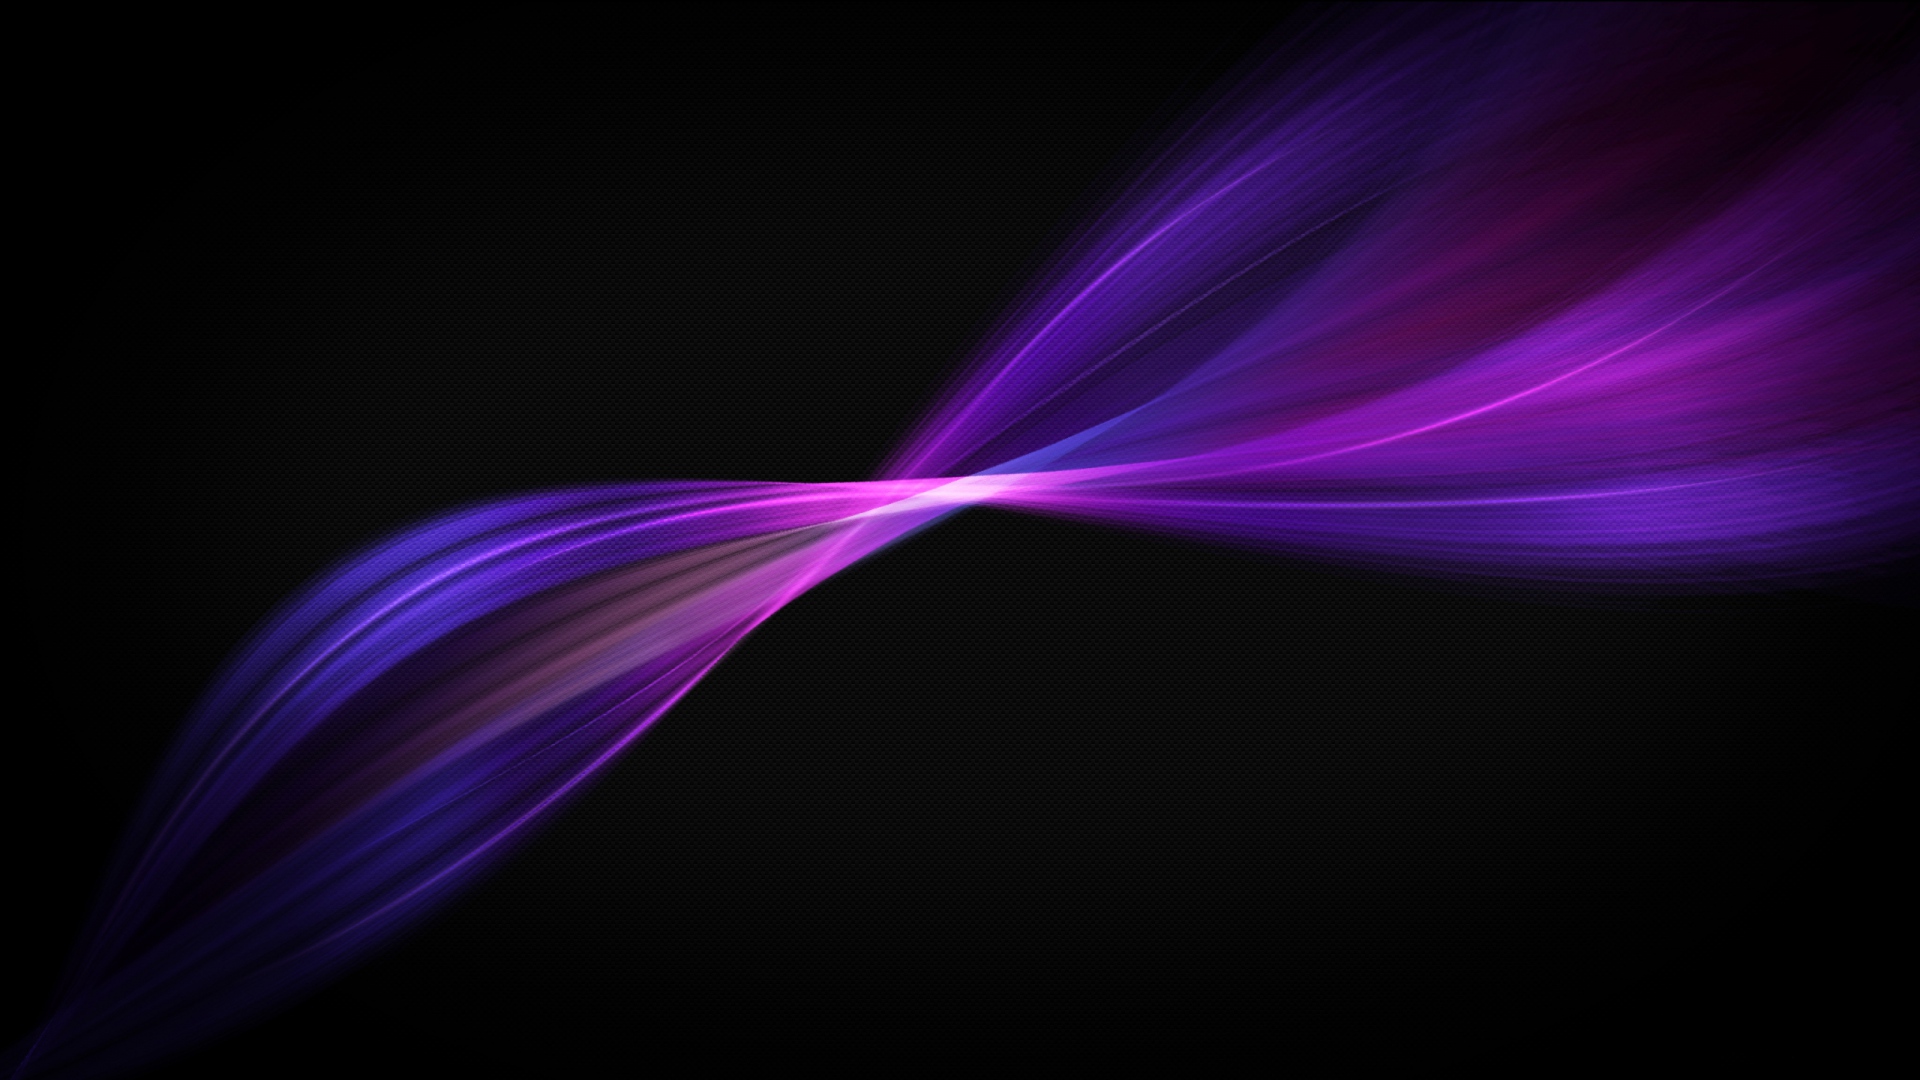 Abstract Lines Samsung Galaxy Note QHD Wallpaper Alhomat Magz